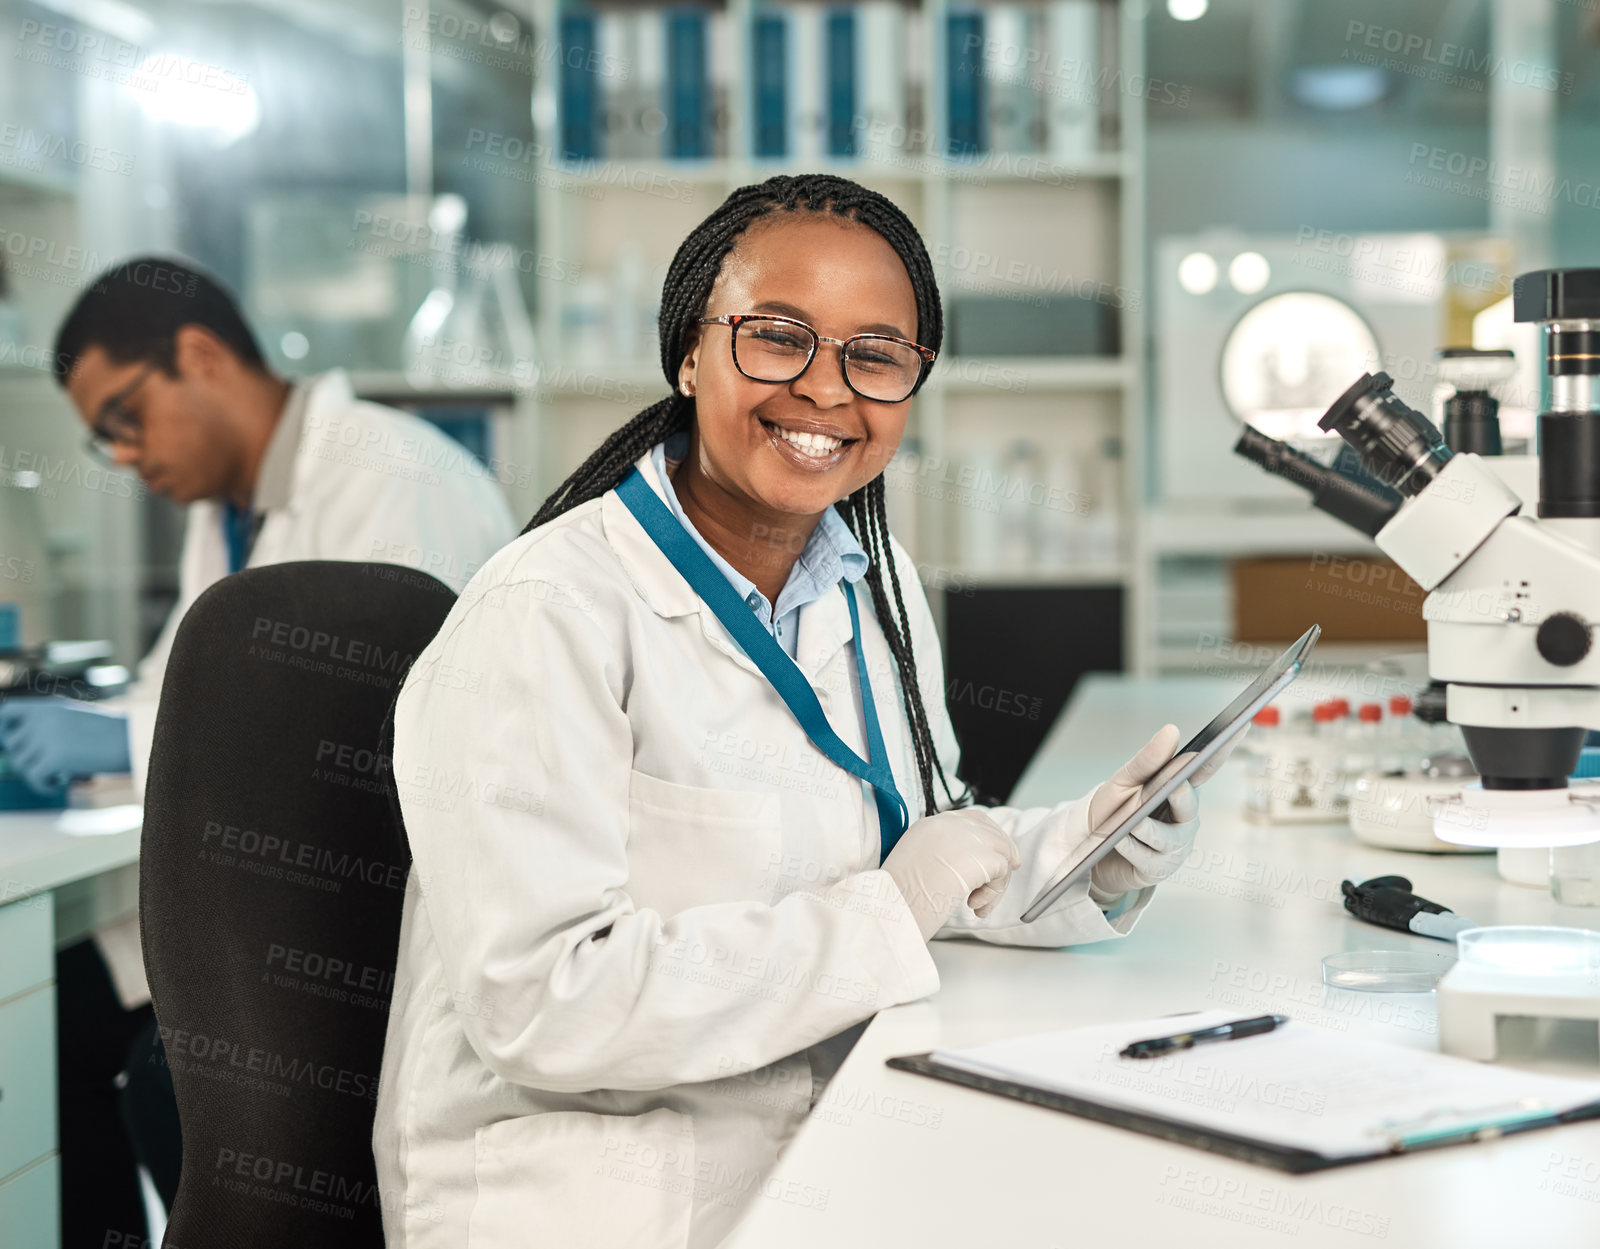 Buy stock photo Portrait of a young scientist using a digital tablet in a lab